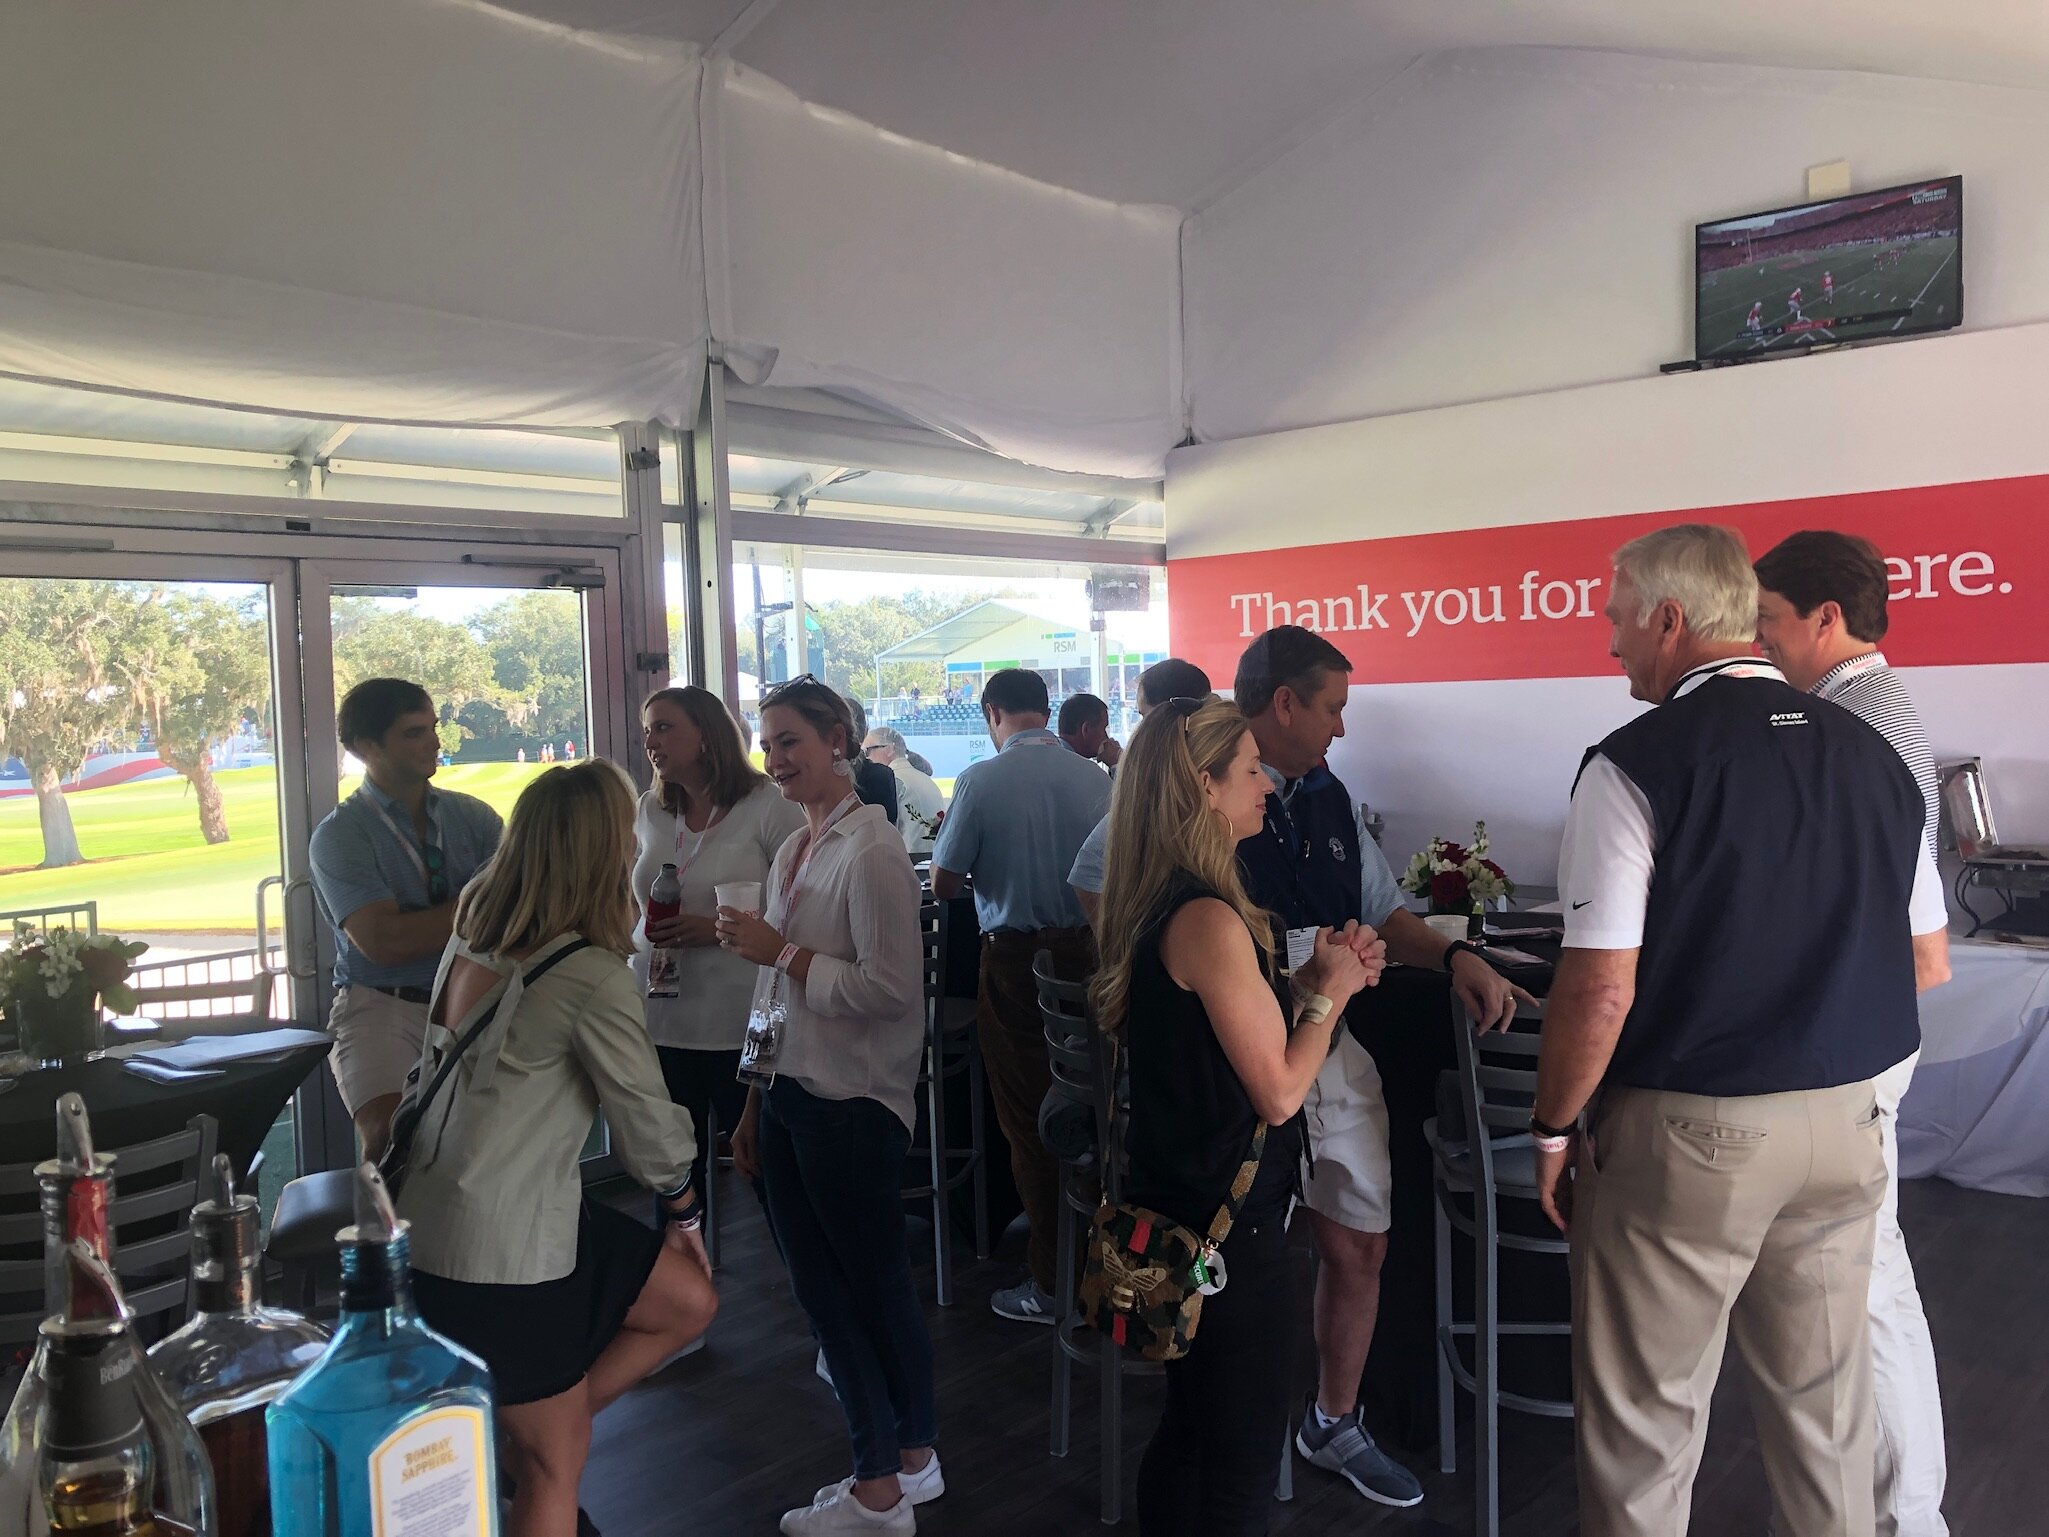 Hospitality management at the 2019 RSM Classic in St. Simons Island, Georgia